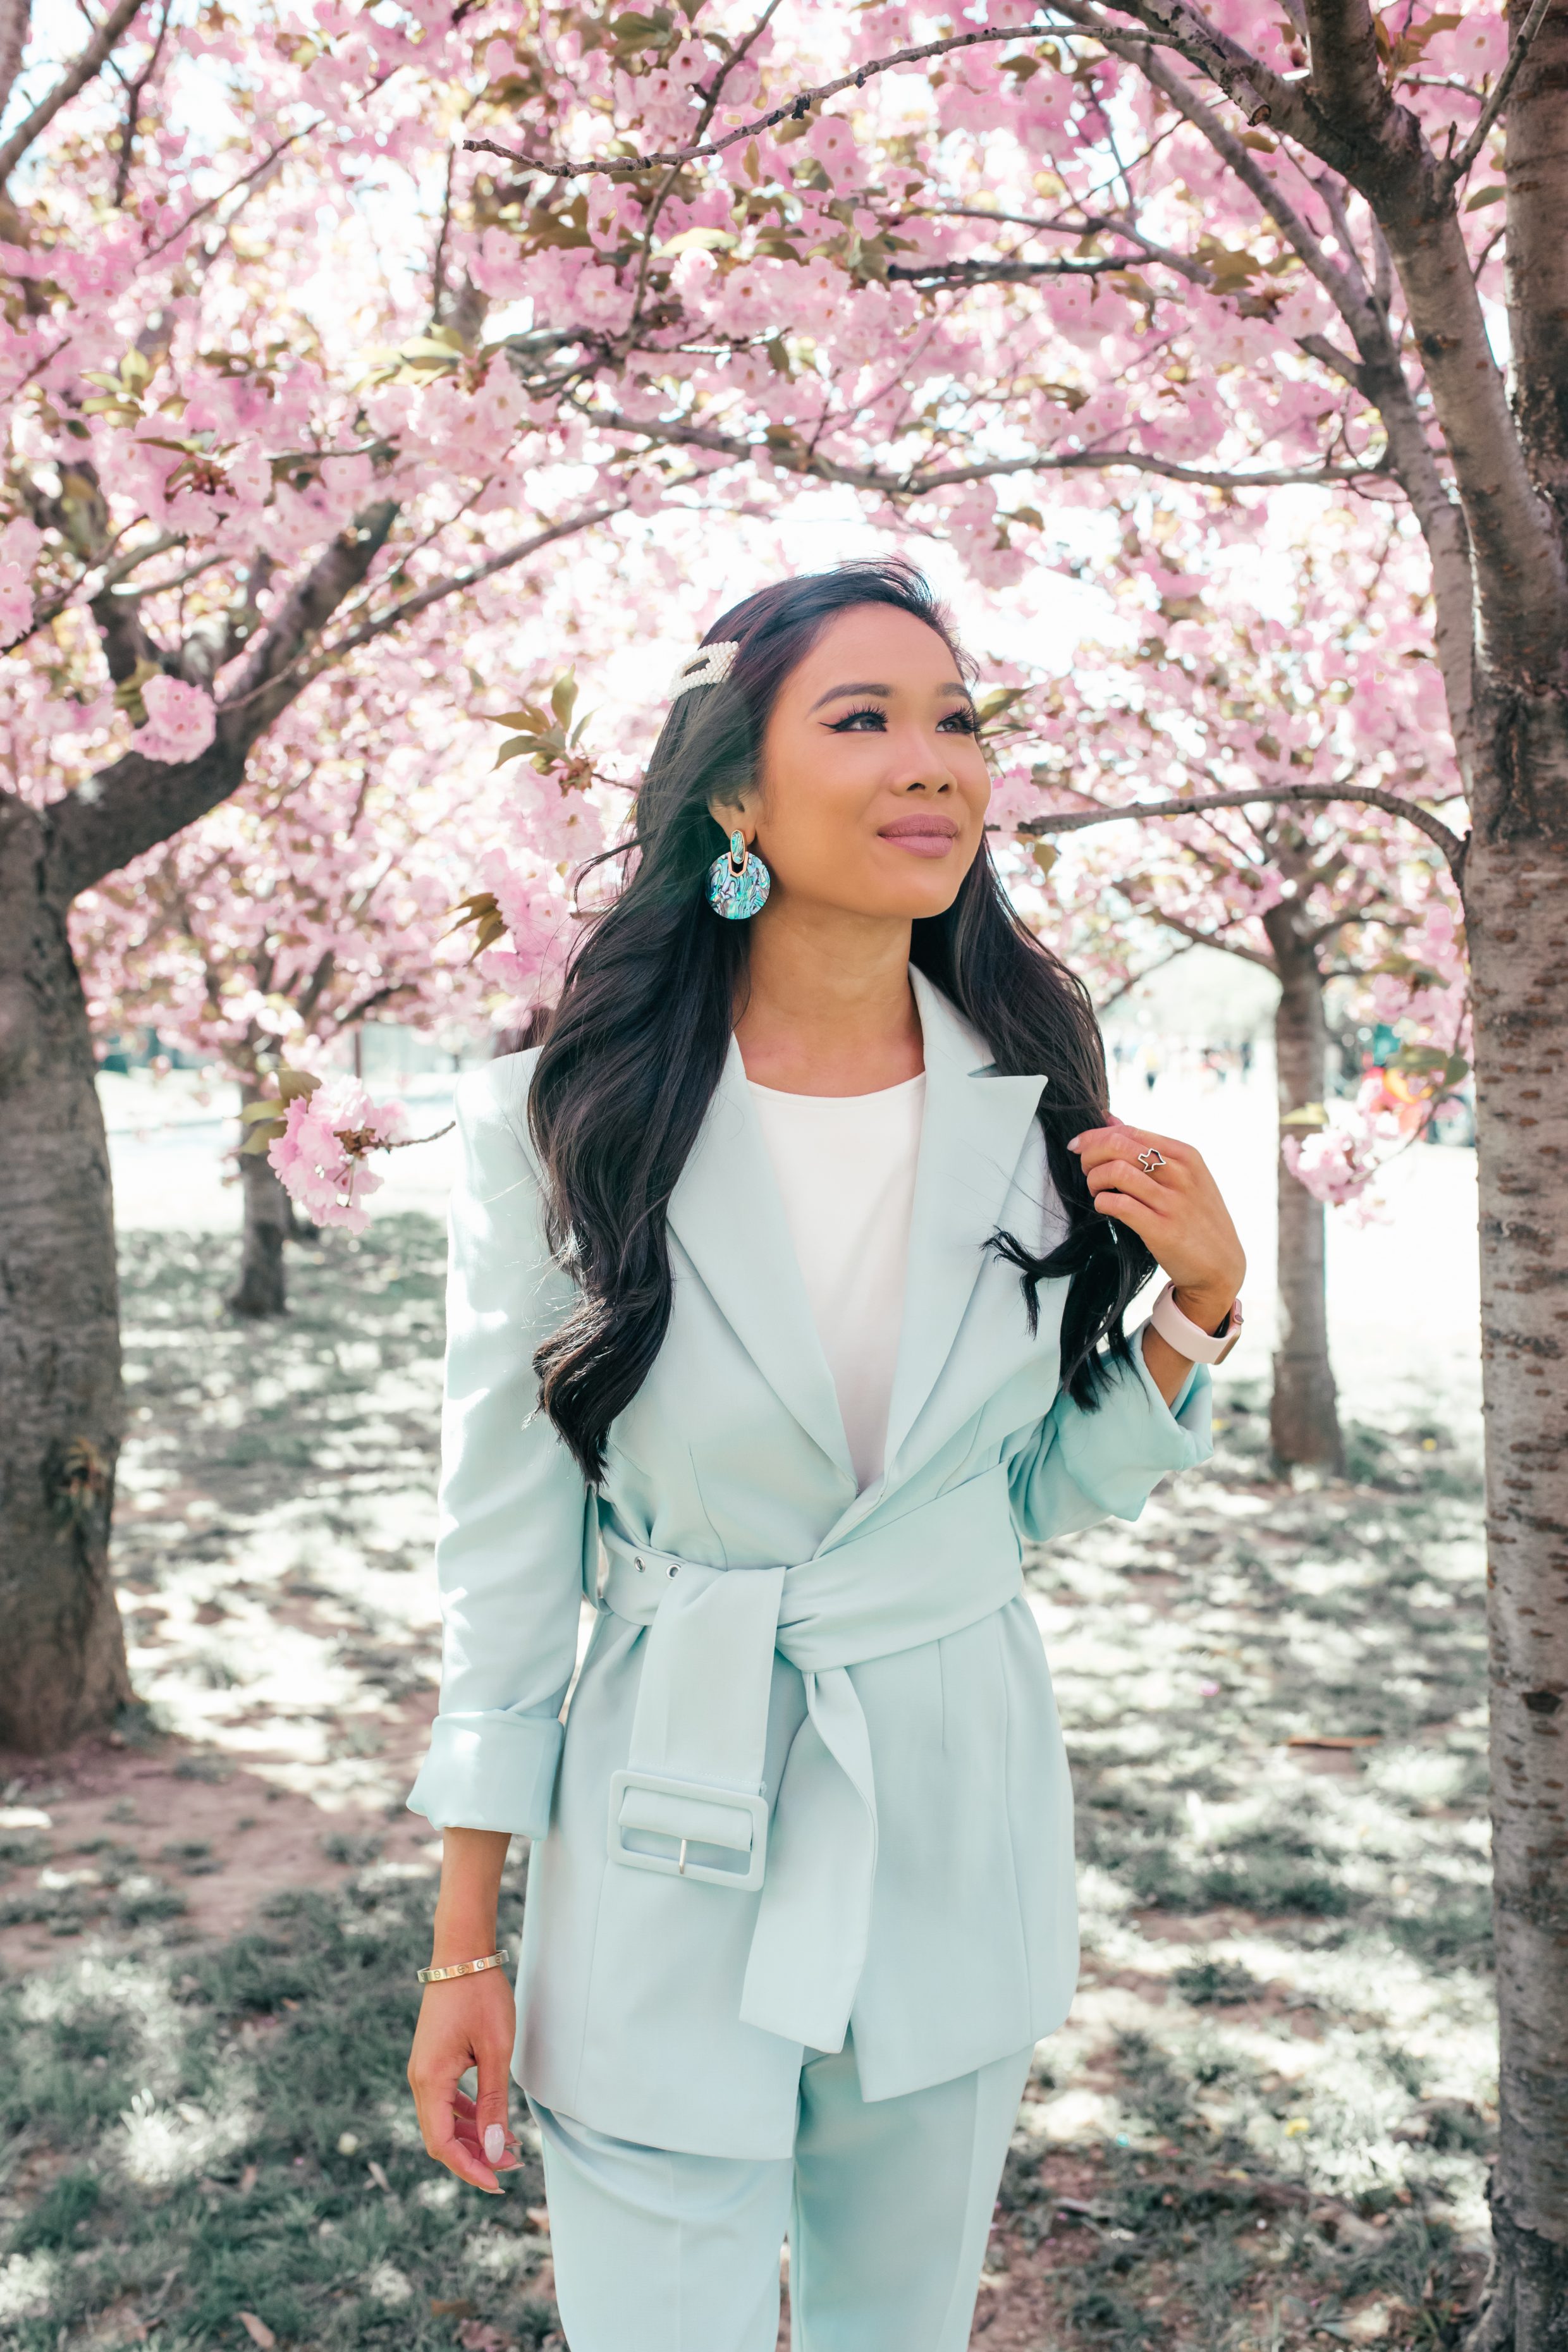 Blogger Hoang-Kim wears a mint green suit to see Cherry Blossoms in Washington, D.C